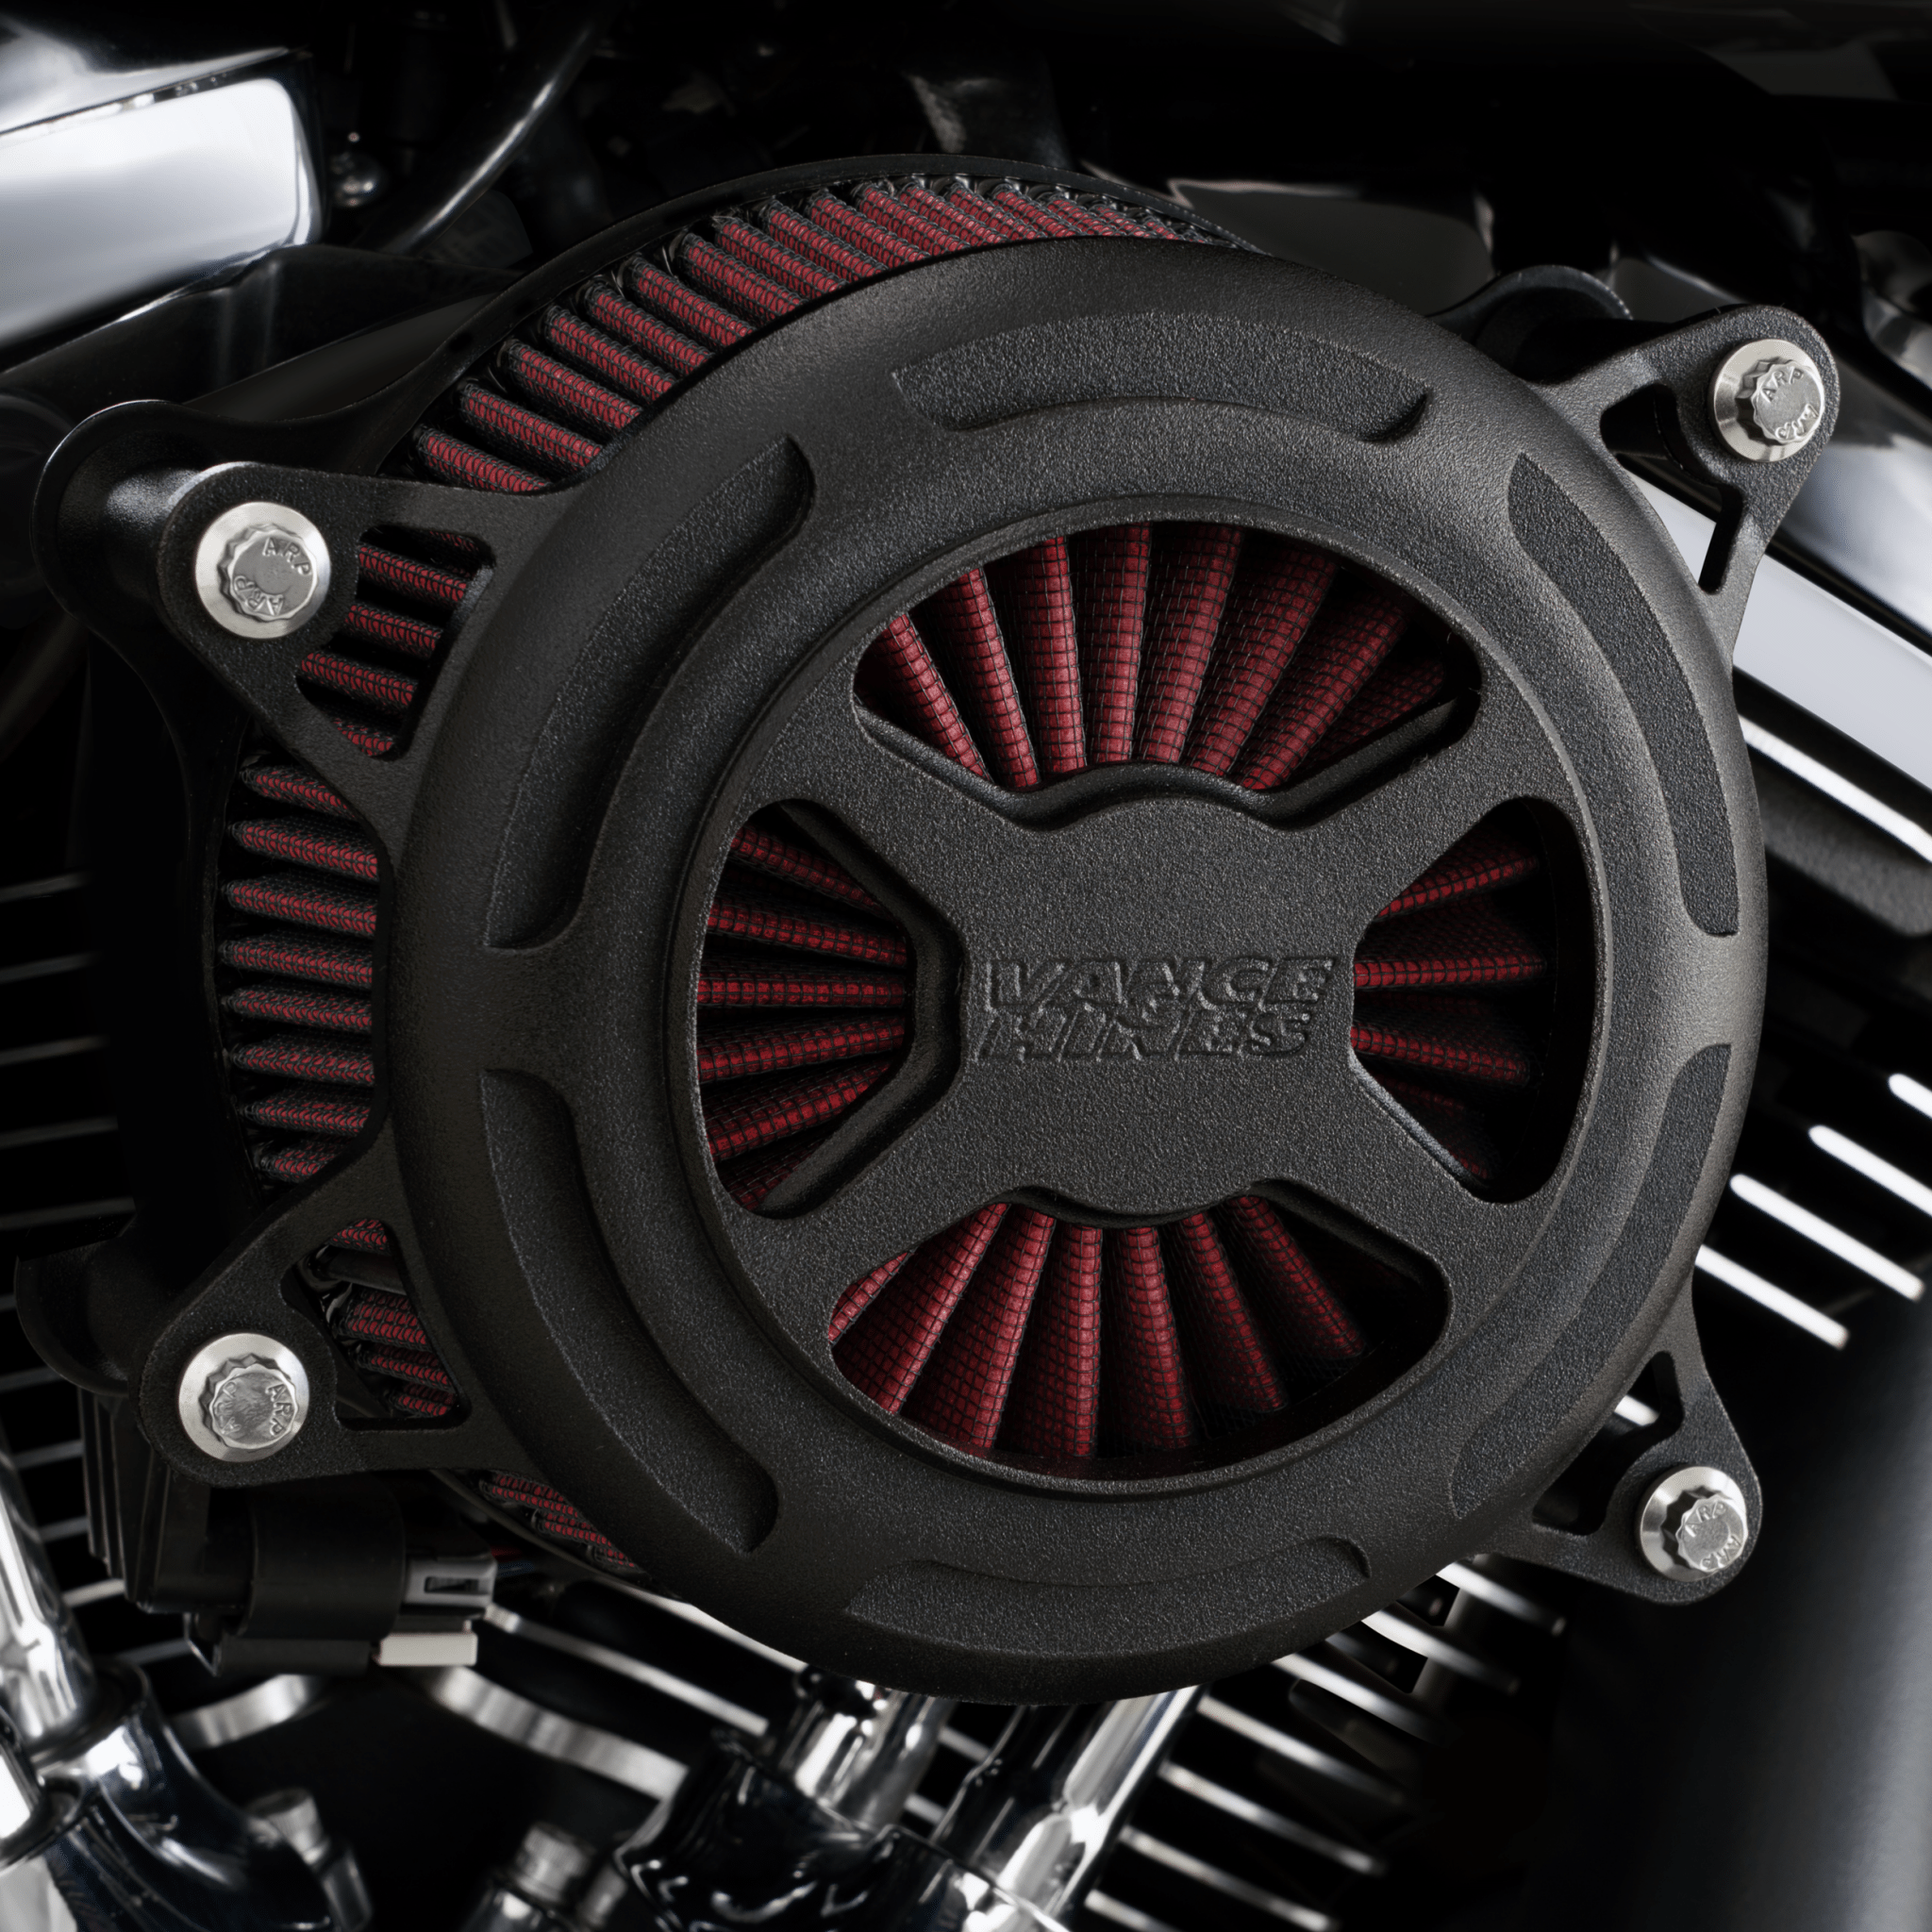 VANCE & HINES-VO2 X Air Cleaner / '17-23 Bagger | '91-'22 XL-Air Filter-MetalCore Harley Supply